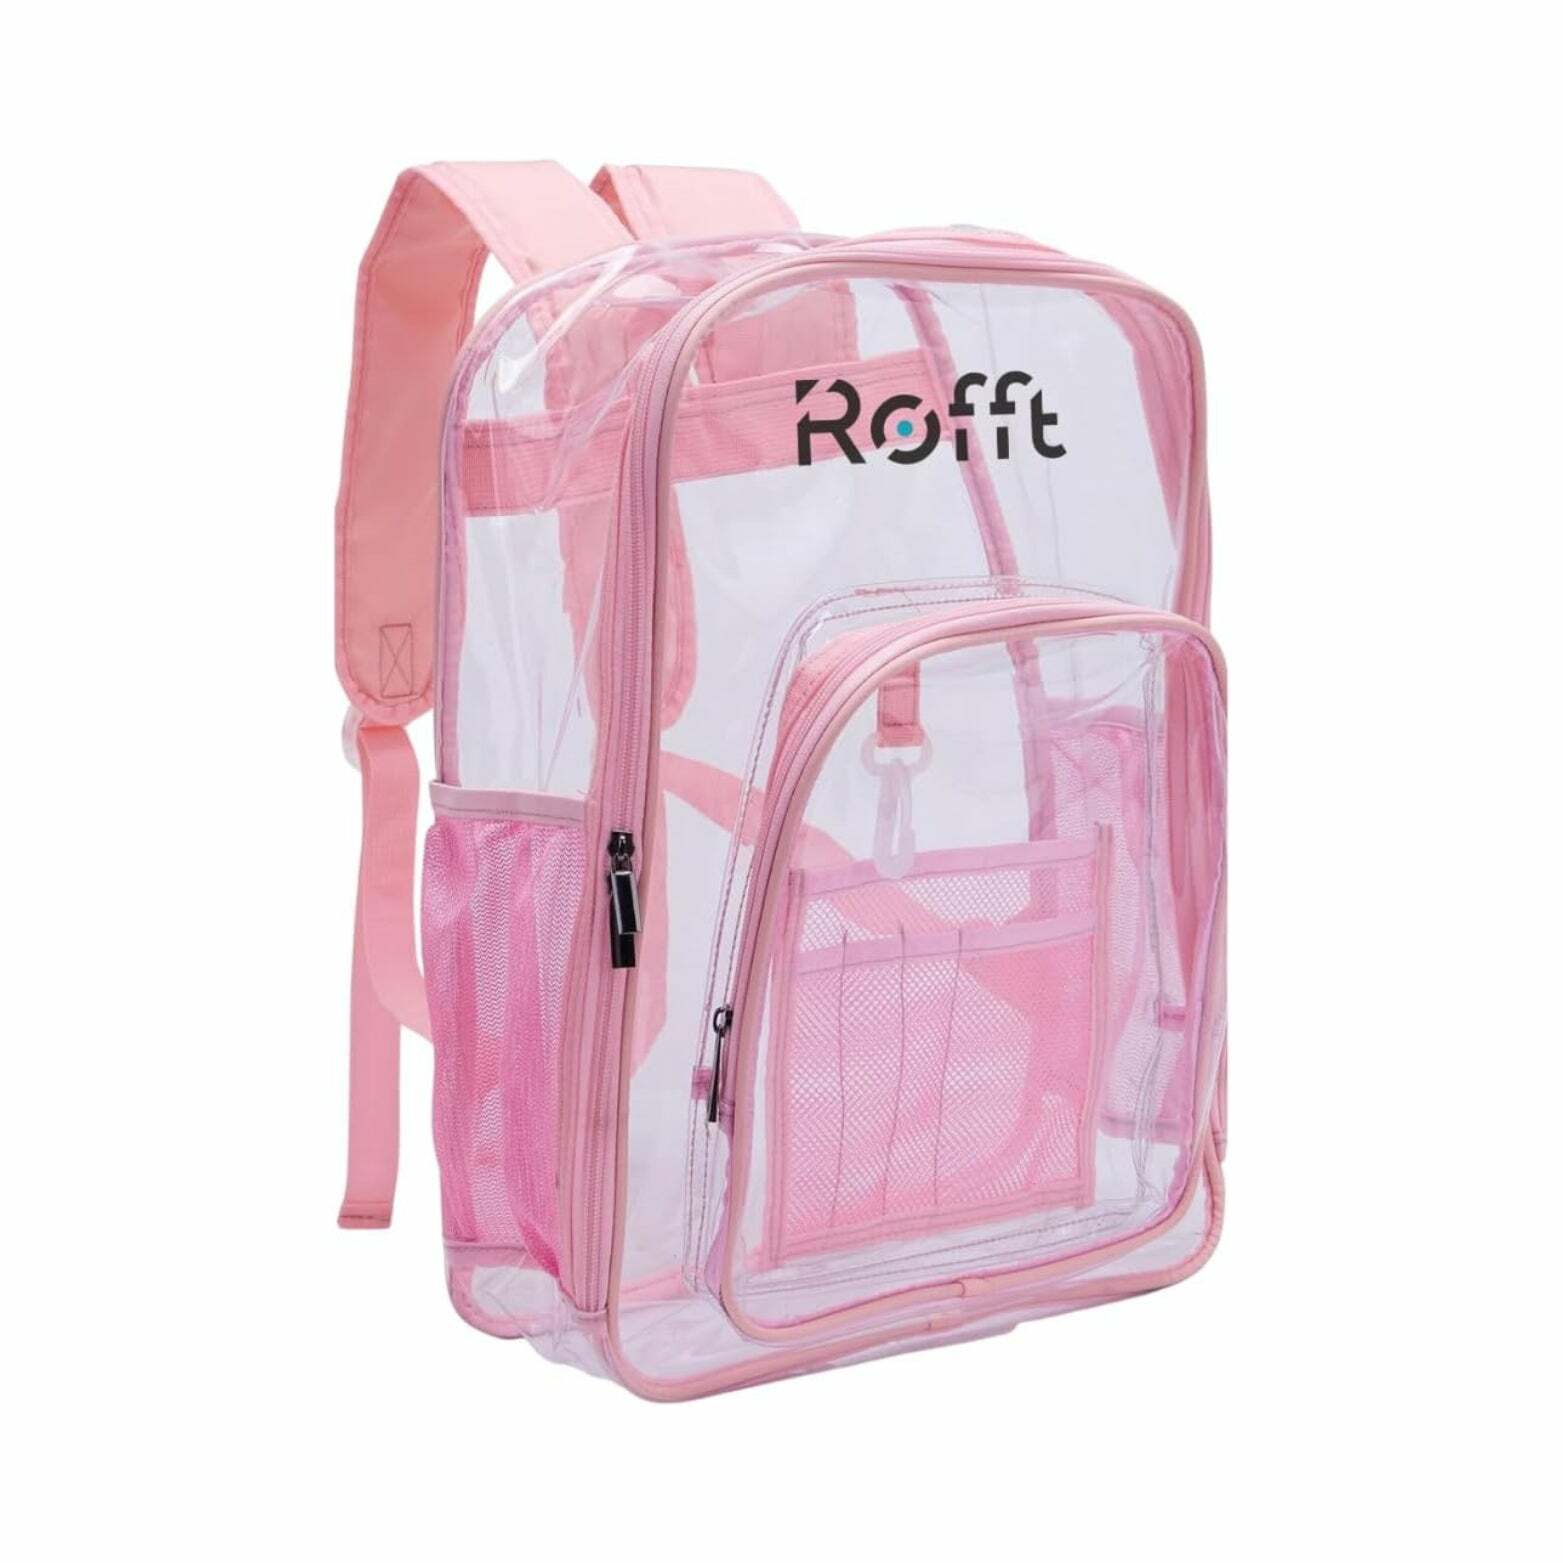 ROFFT Large Clear Backpack - Durable PVC with Reinforced Straps and Multiple Pockets, Pink